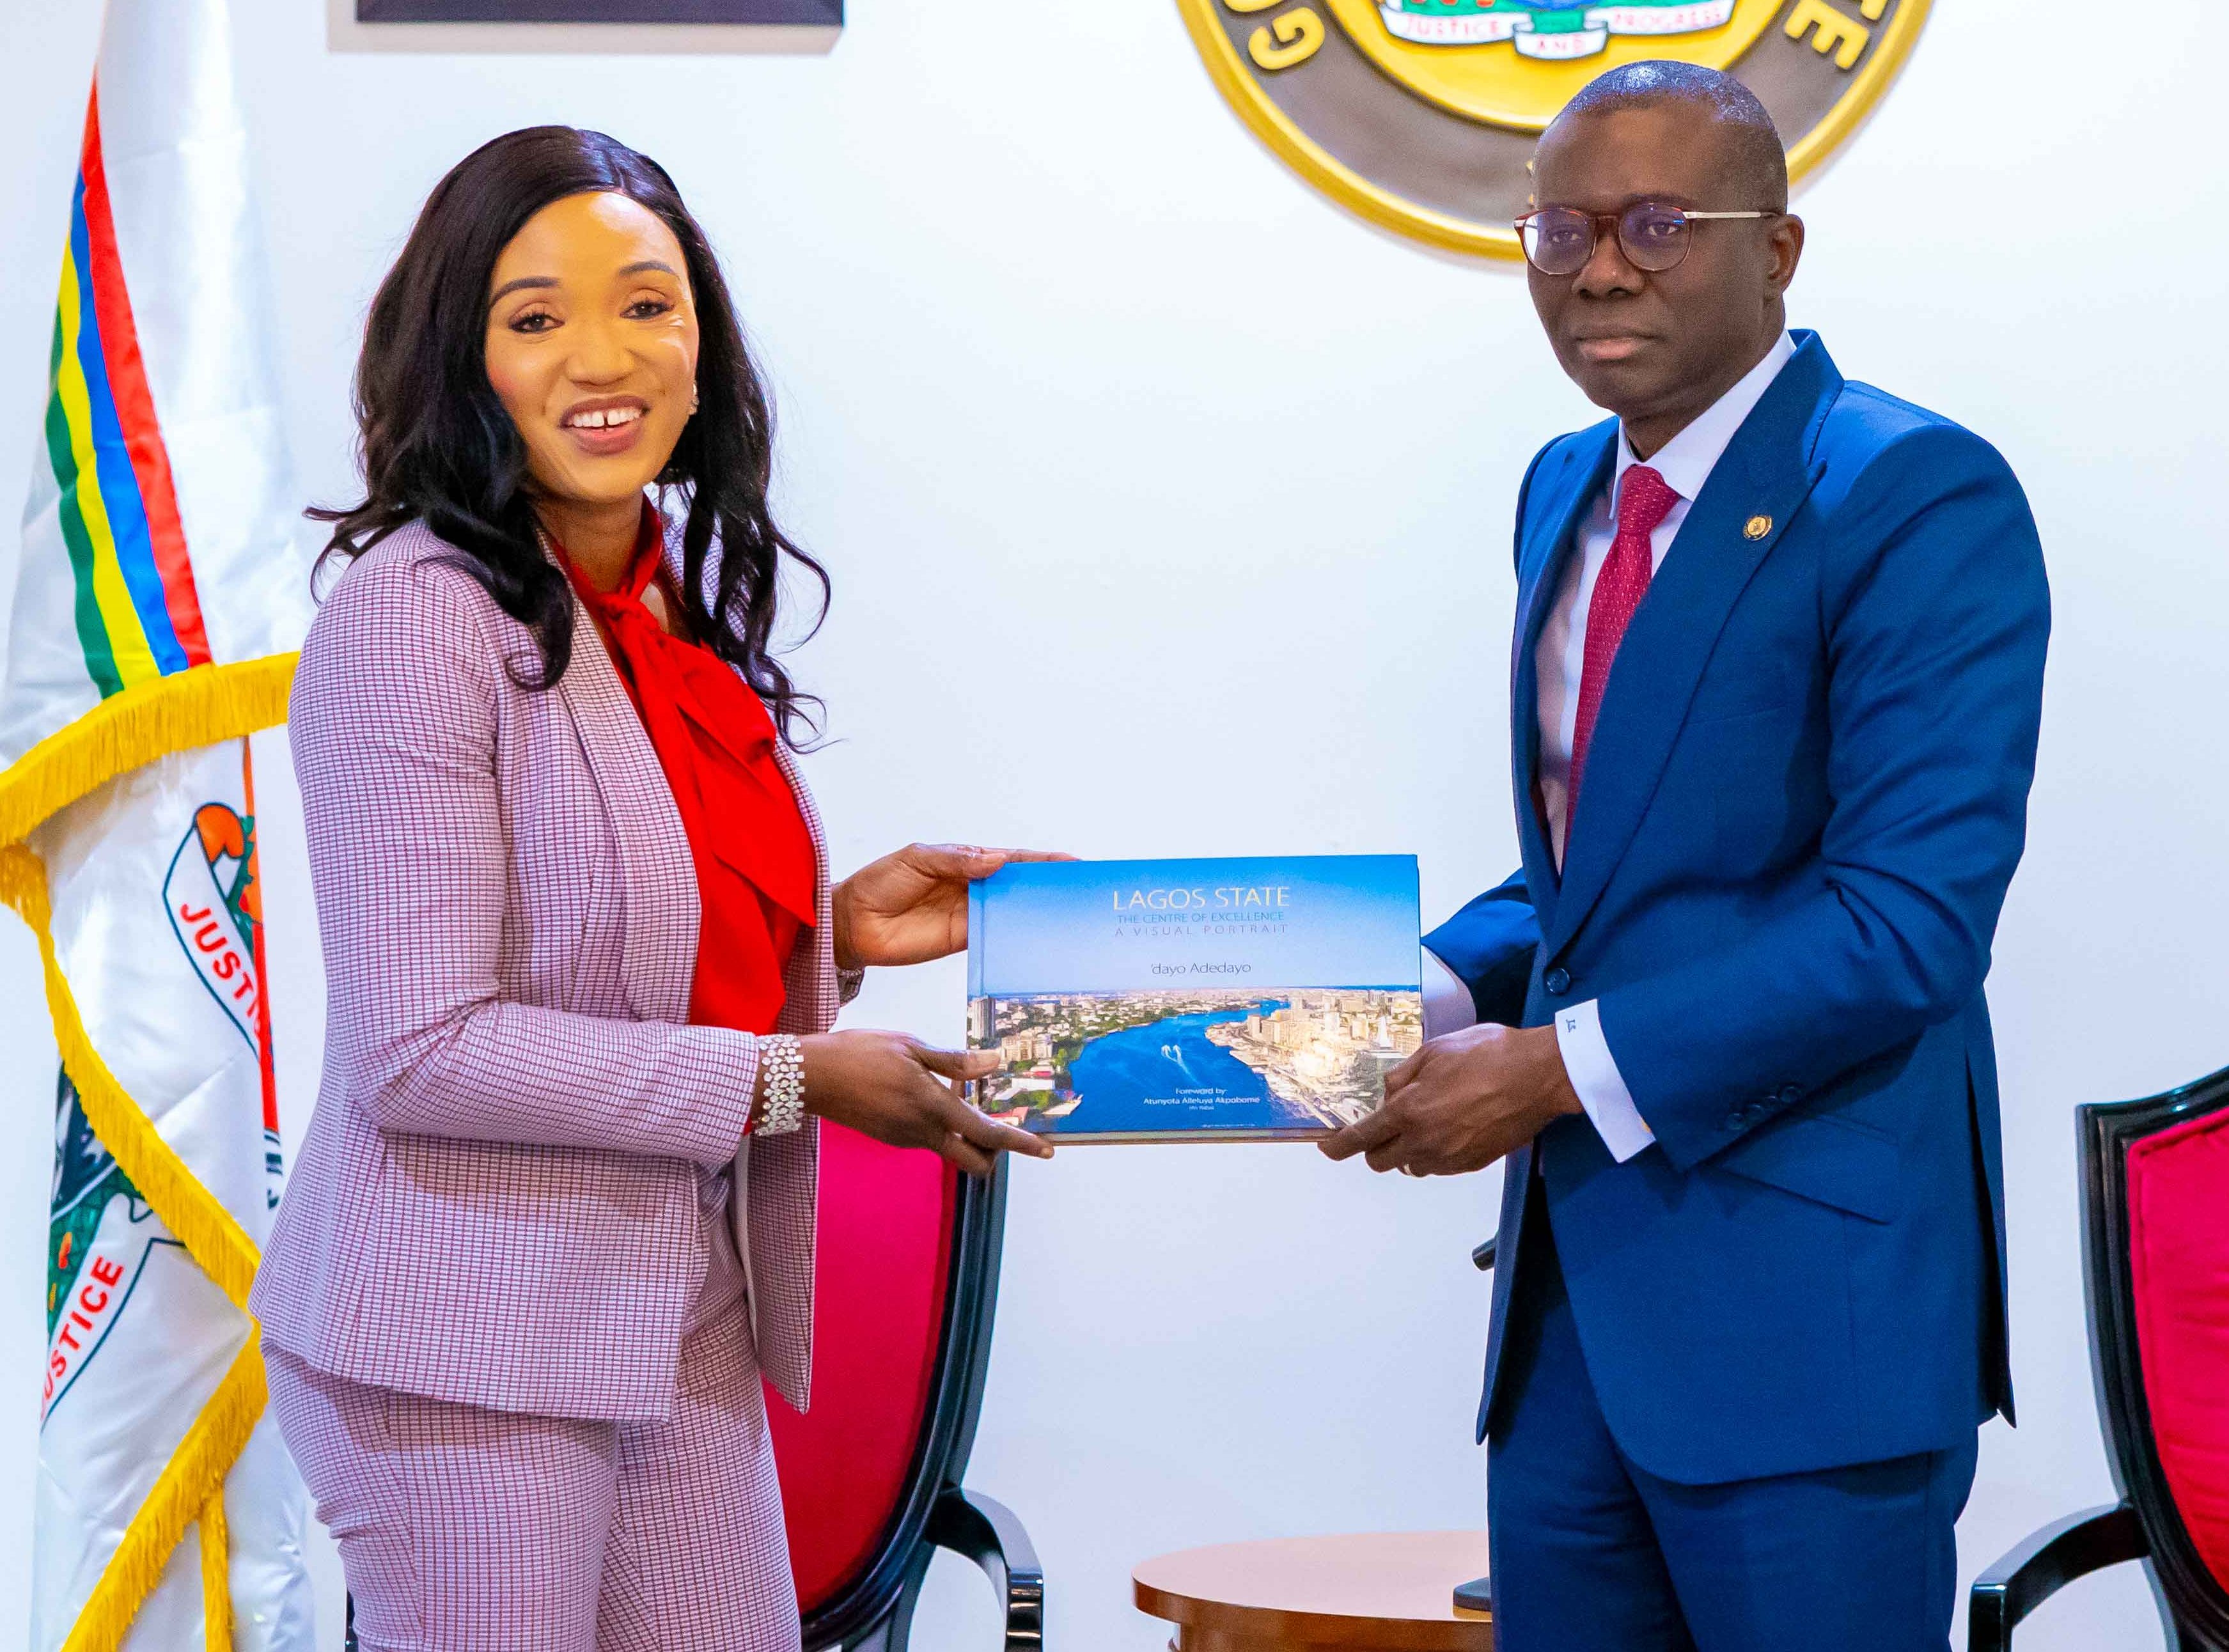 MANAGEMENT OF TITAN TRUST BANK LIMITED PAYS COURTESY VISIT TO GOVERNOR SANWO-OLU